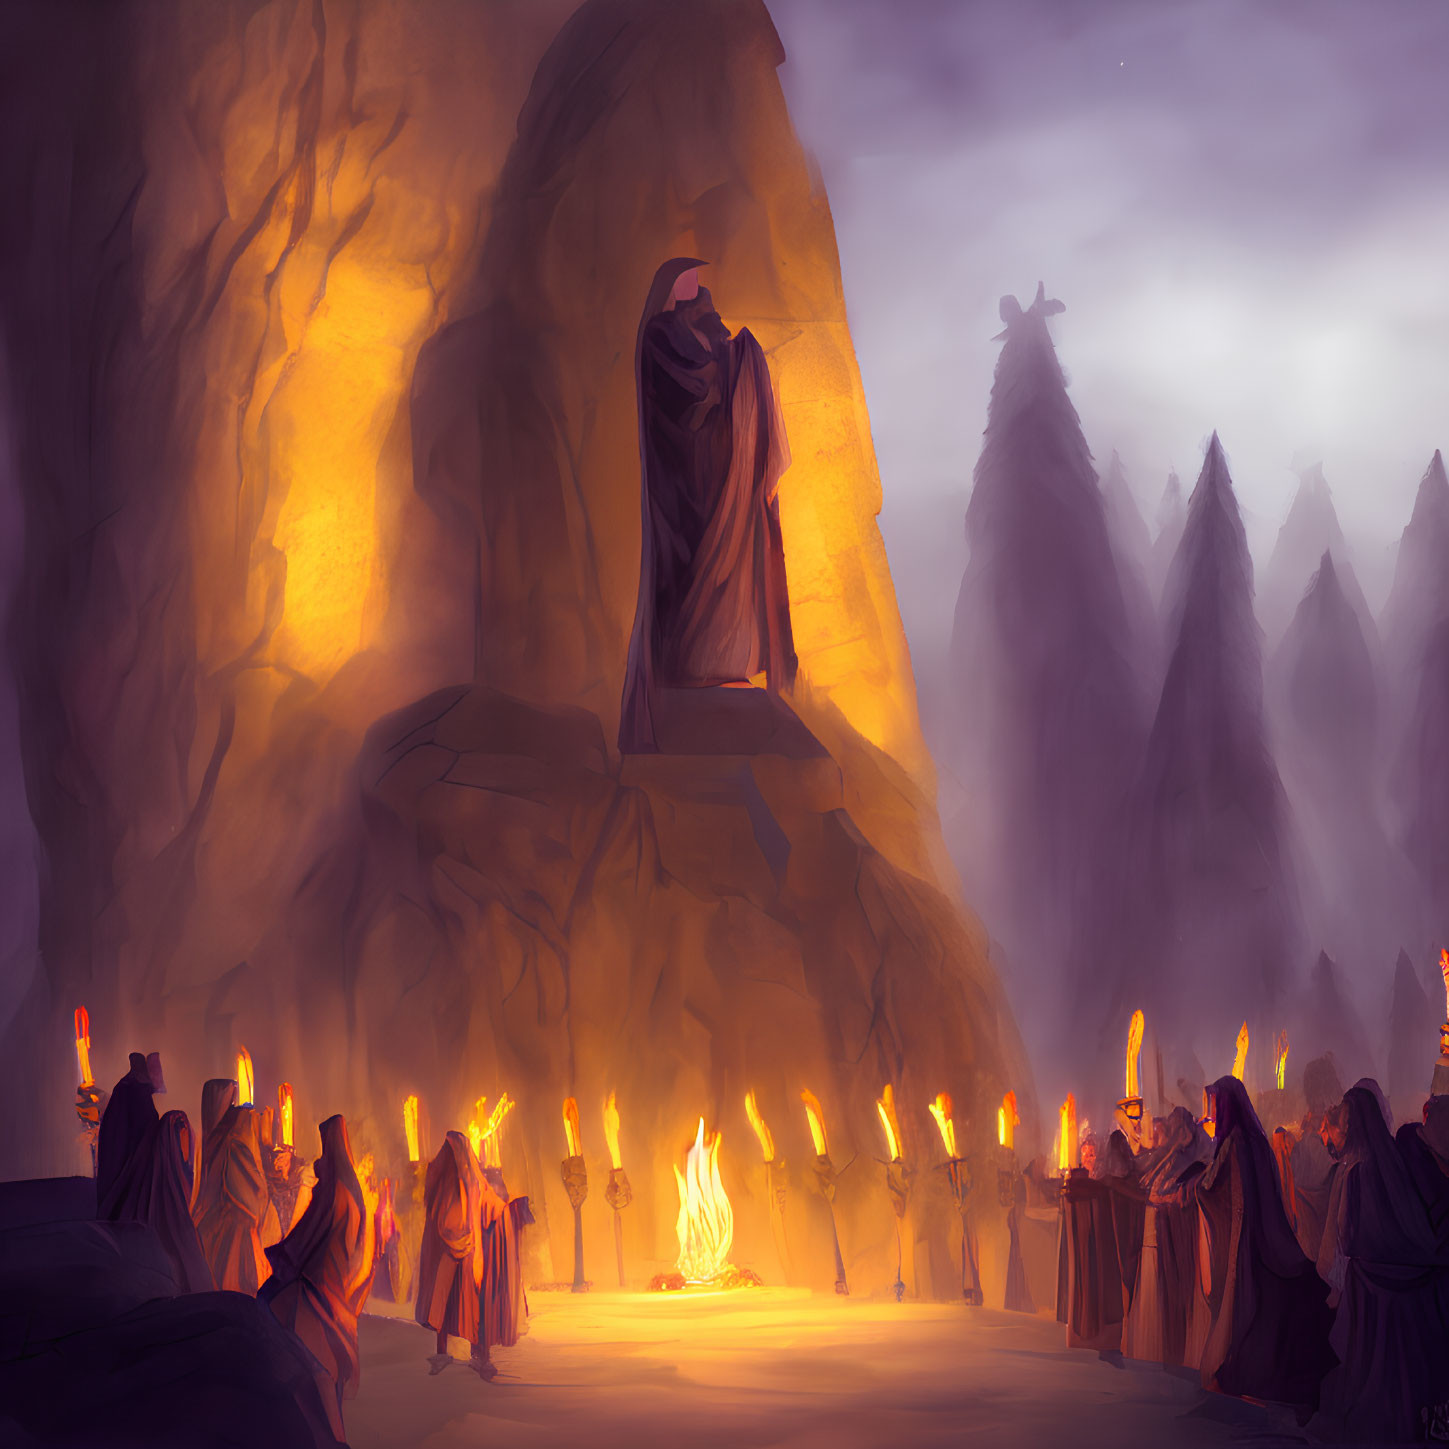 Hooded Figures Gathered Around Fire in Mountainous Setting